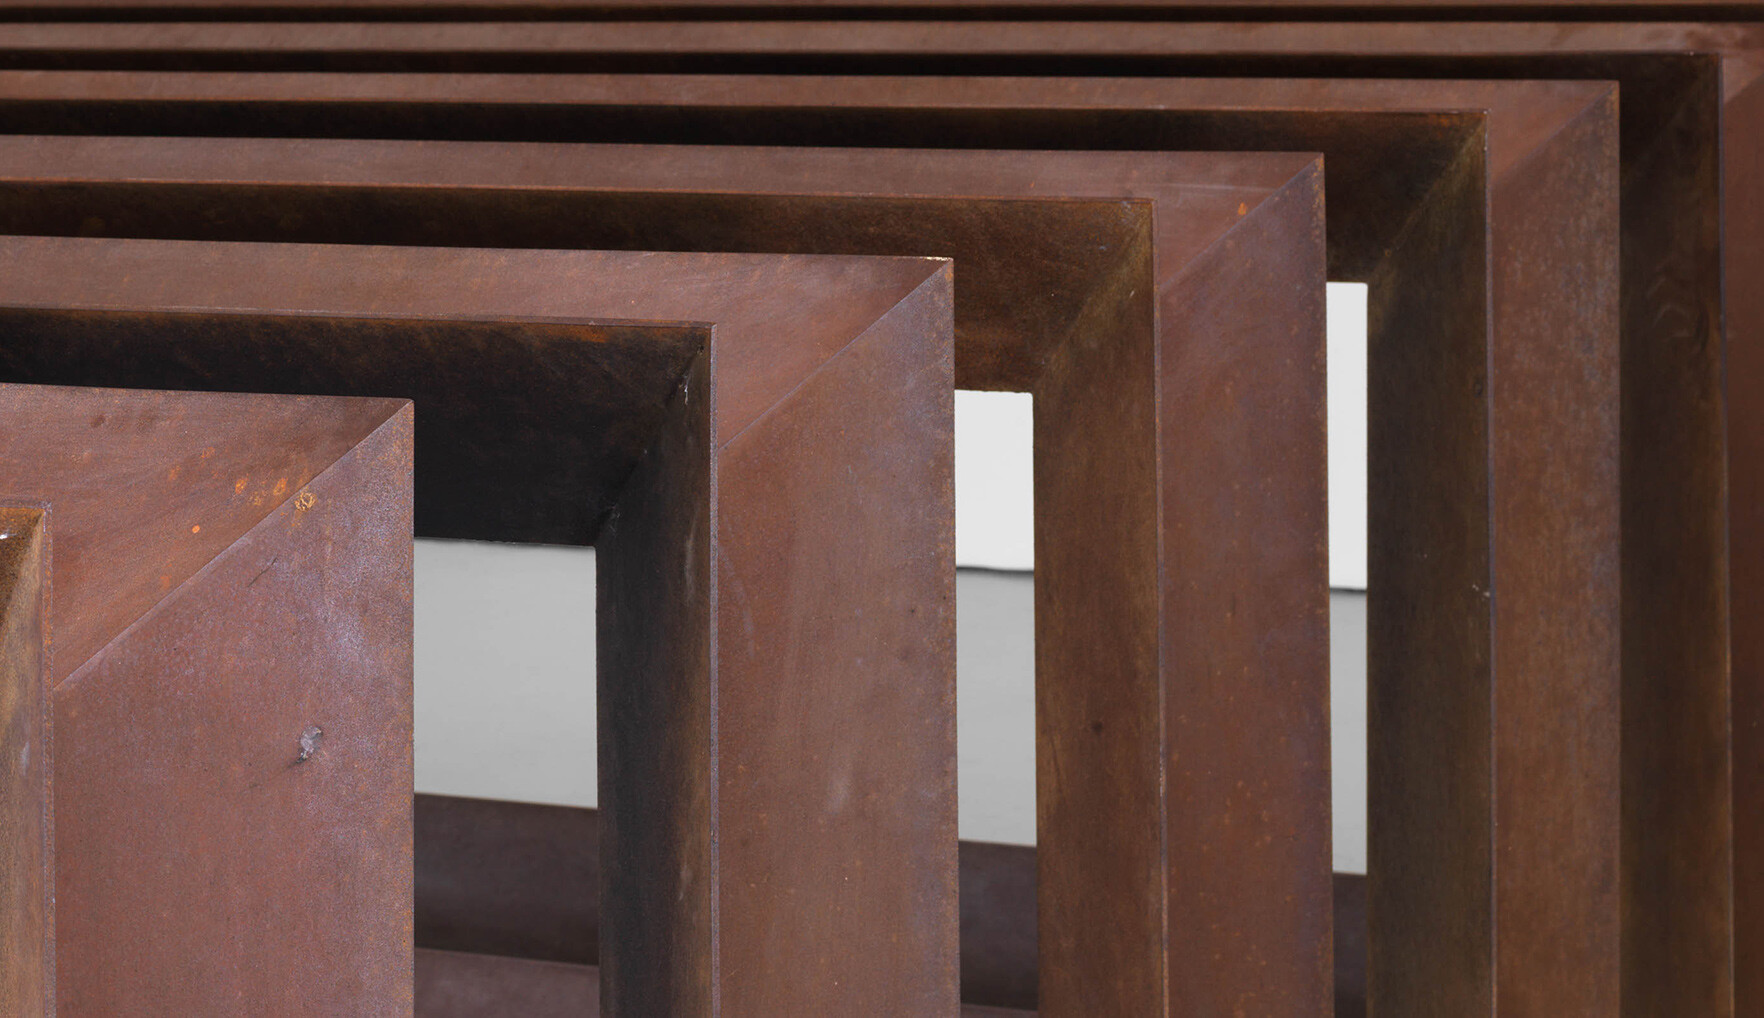 A detail from an untitled artwork by Donald Judd, dated 1979.